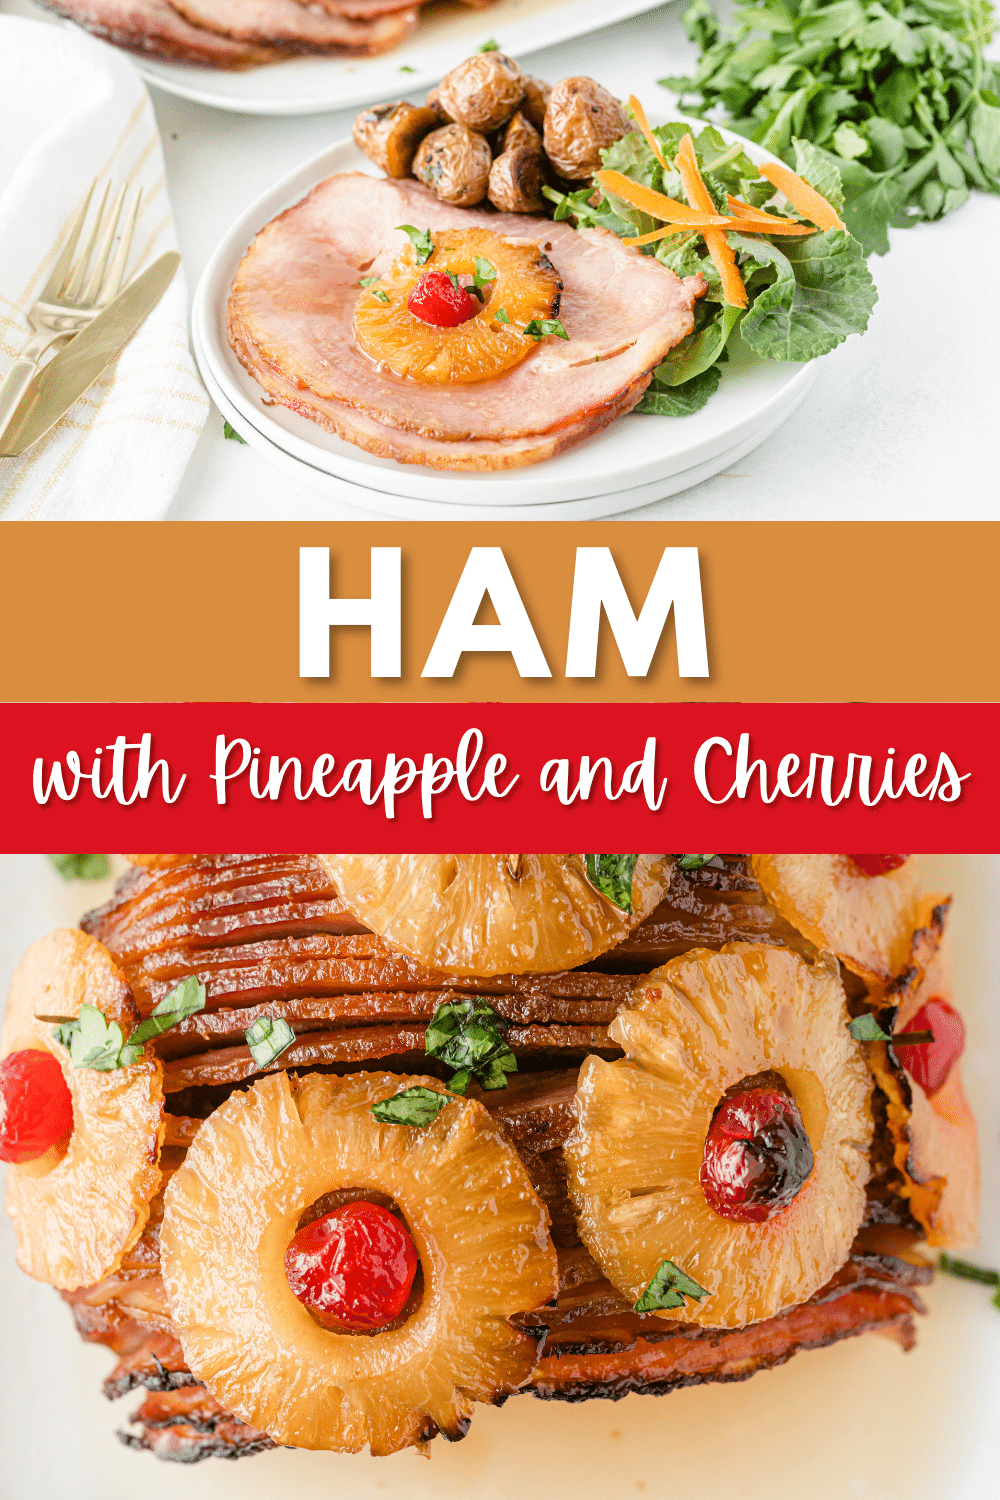 This Ham with Pineapple and Cherries is the perfect addition to your holiday table. The combination of fruit and ham is a timeless classic. #hamwithpineappleandcherries #brownsugarglaze #spiralcuthams #holidayham #easter via @wondermomwannab